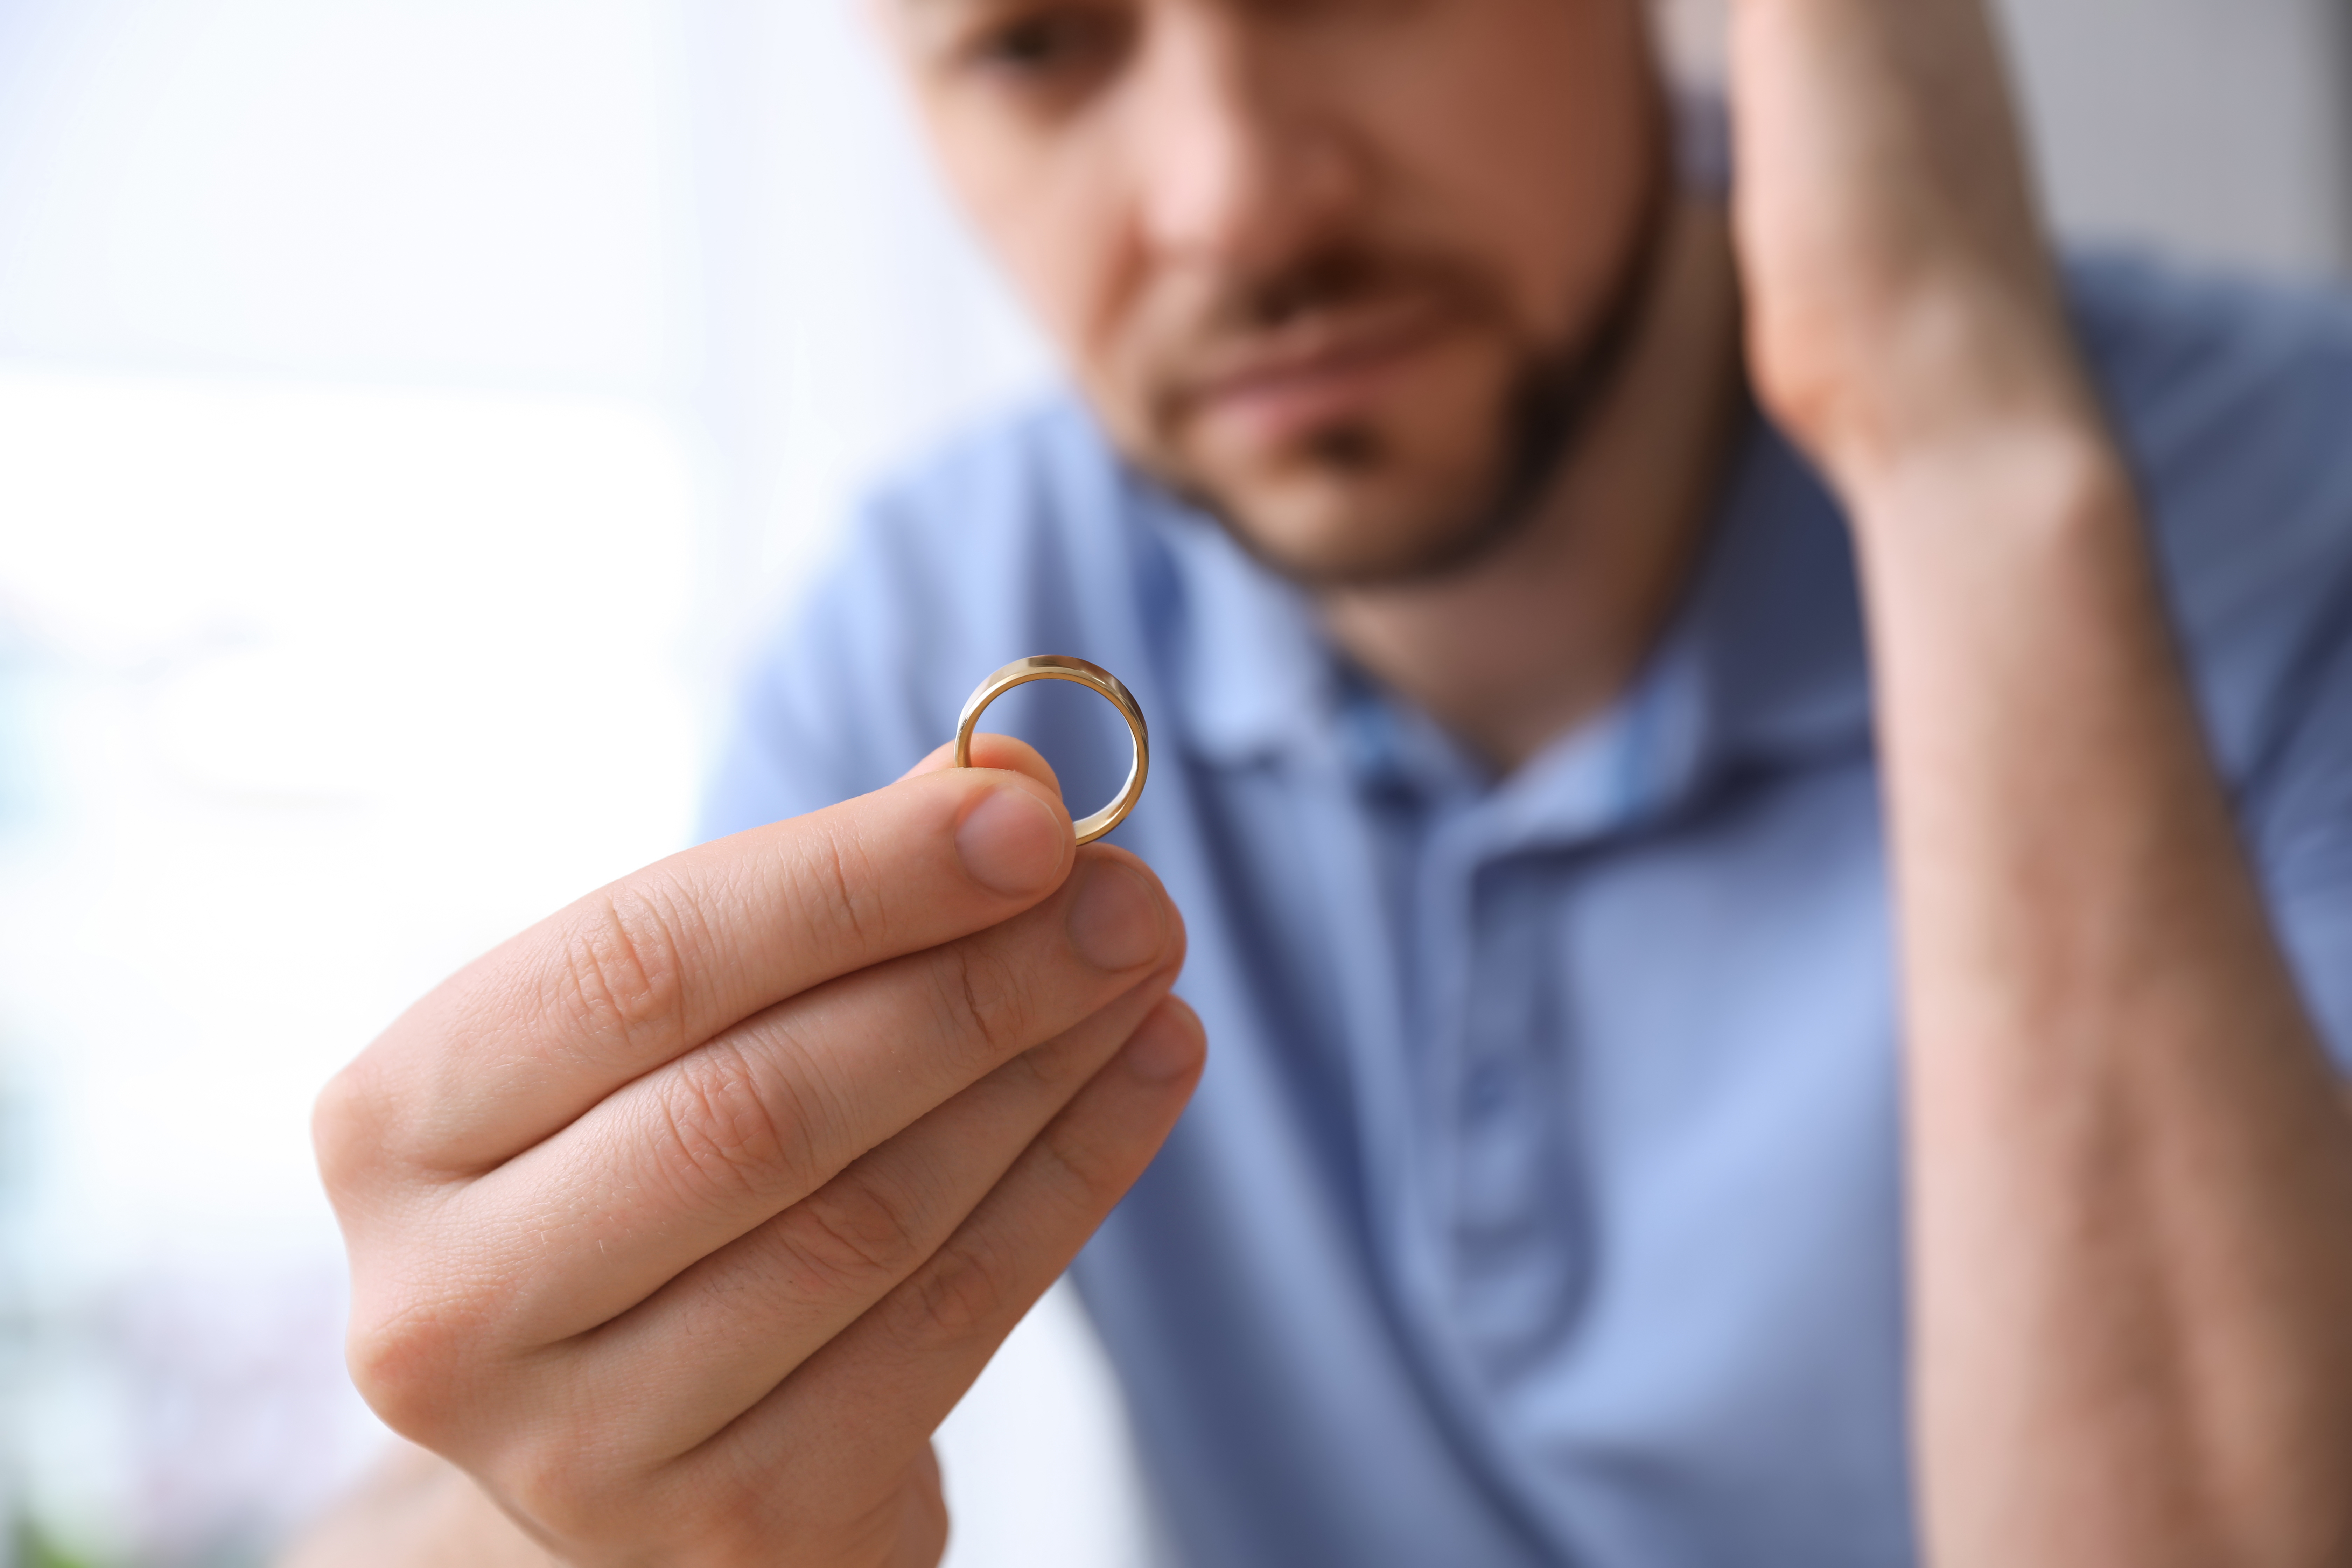 A frustrated man holding a ring | Source: Shutterstock